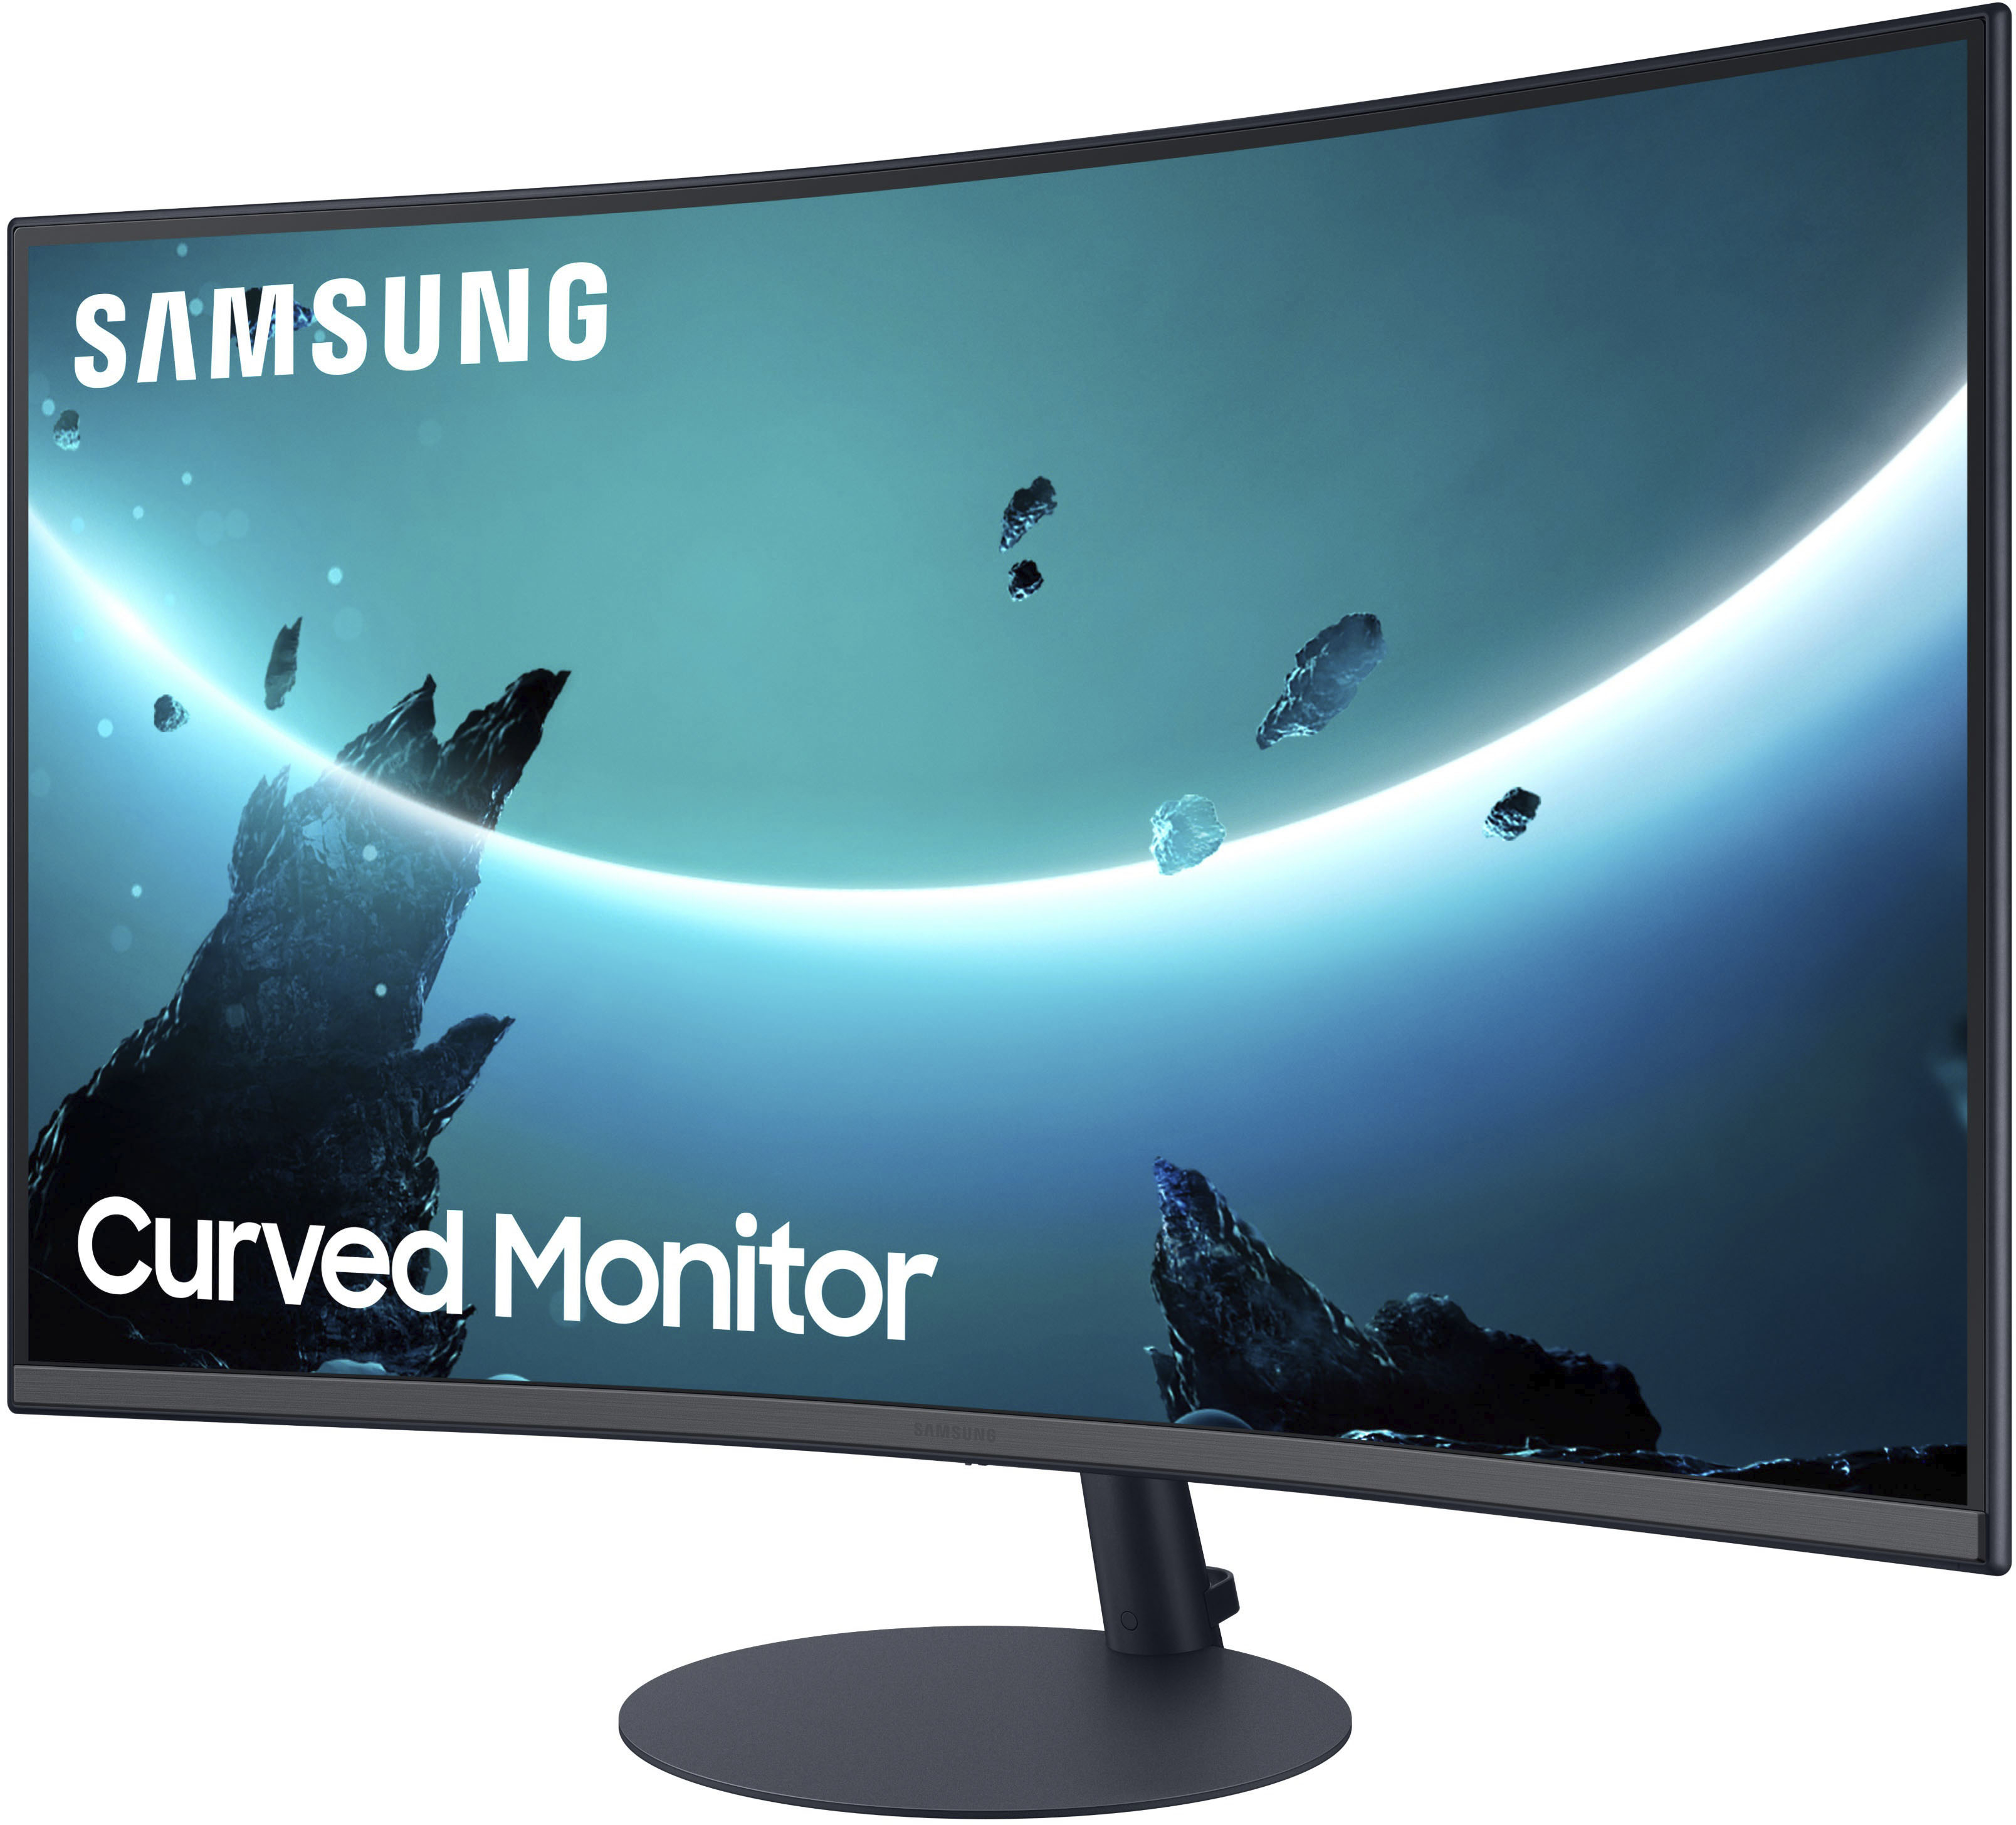 Sta op zegevierend Haast je Samsung T55 Series 27" LED 1000R Curved FHD FreeSync Monitor with Speakers  (DisplayPort, HDMI, VGA) Black LC27T550FDNXZA - Best Buy